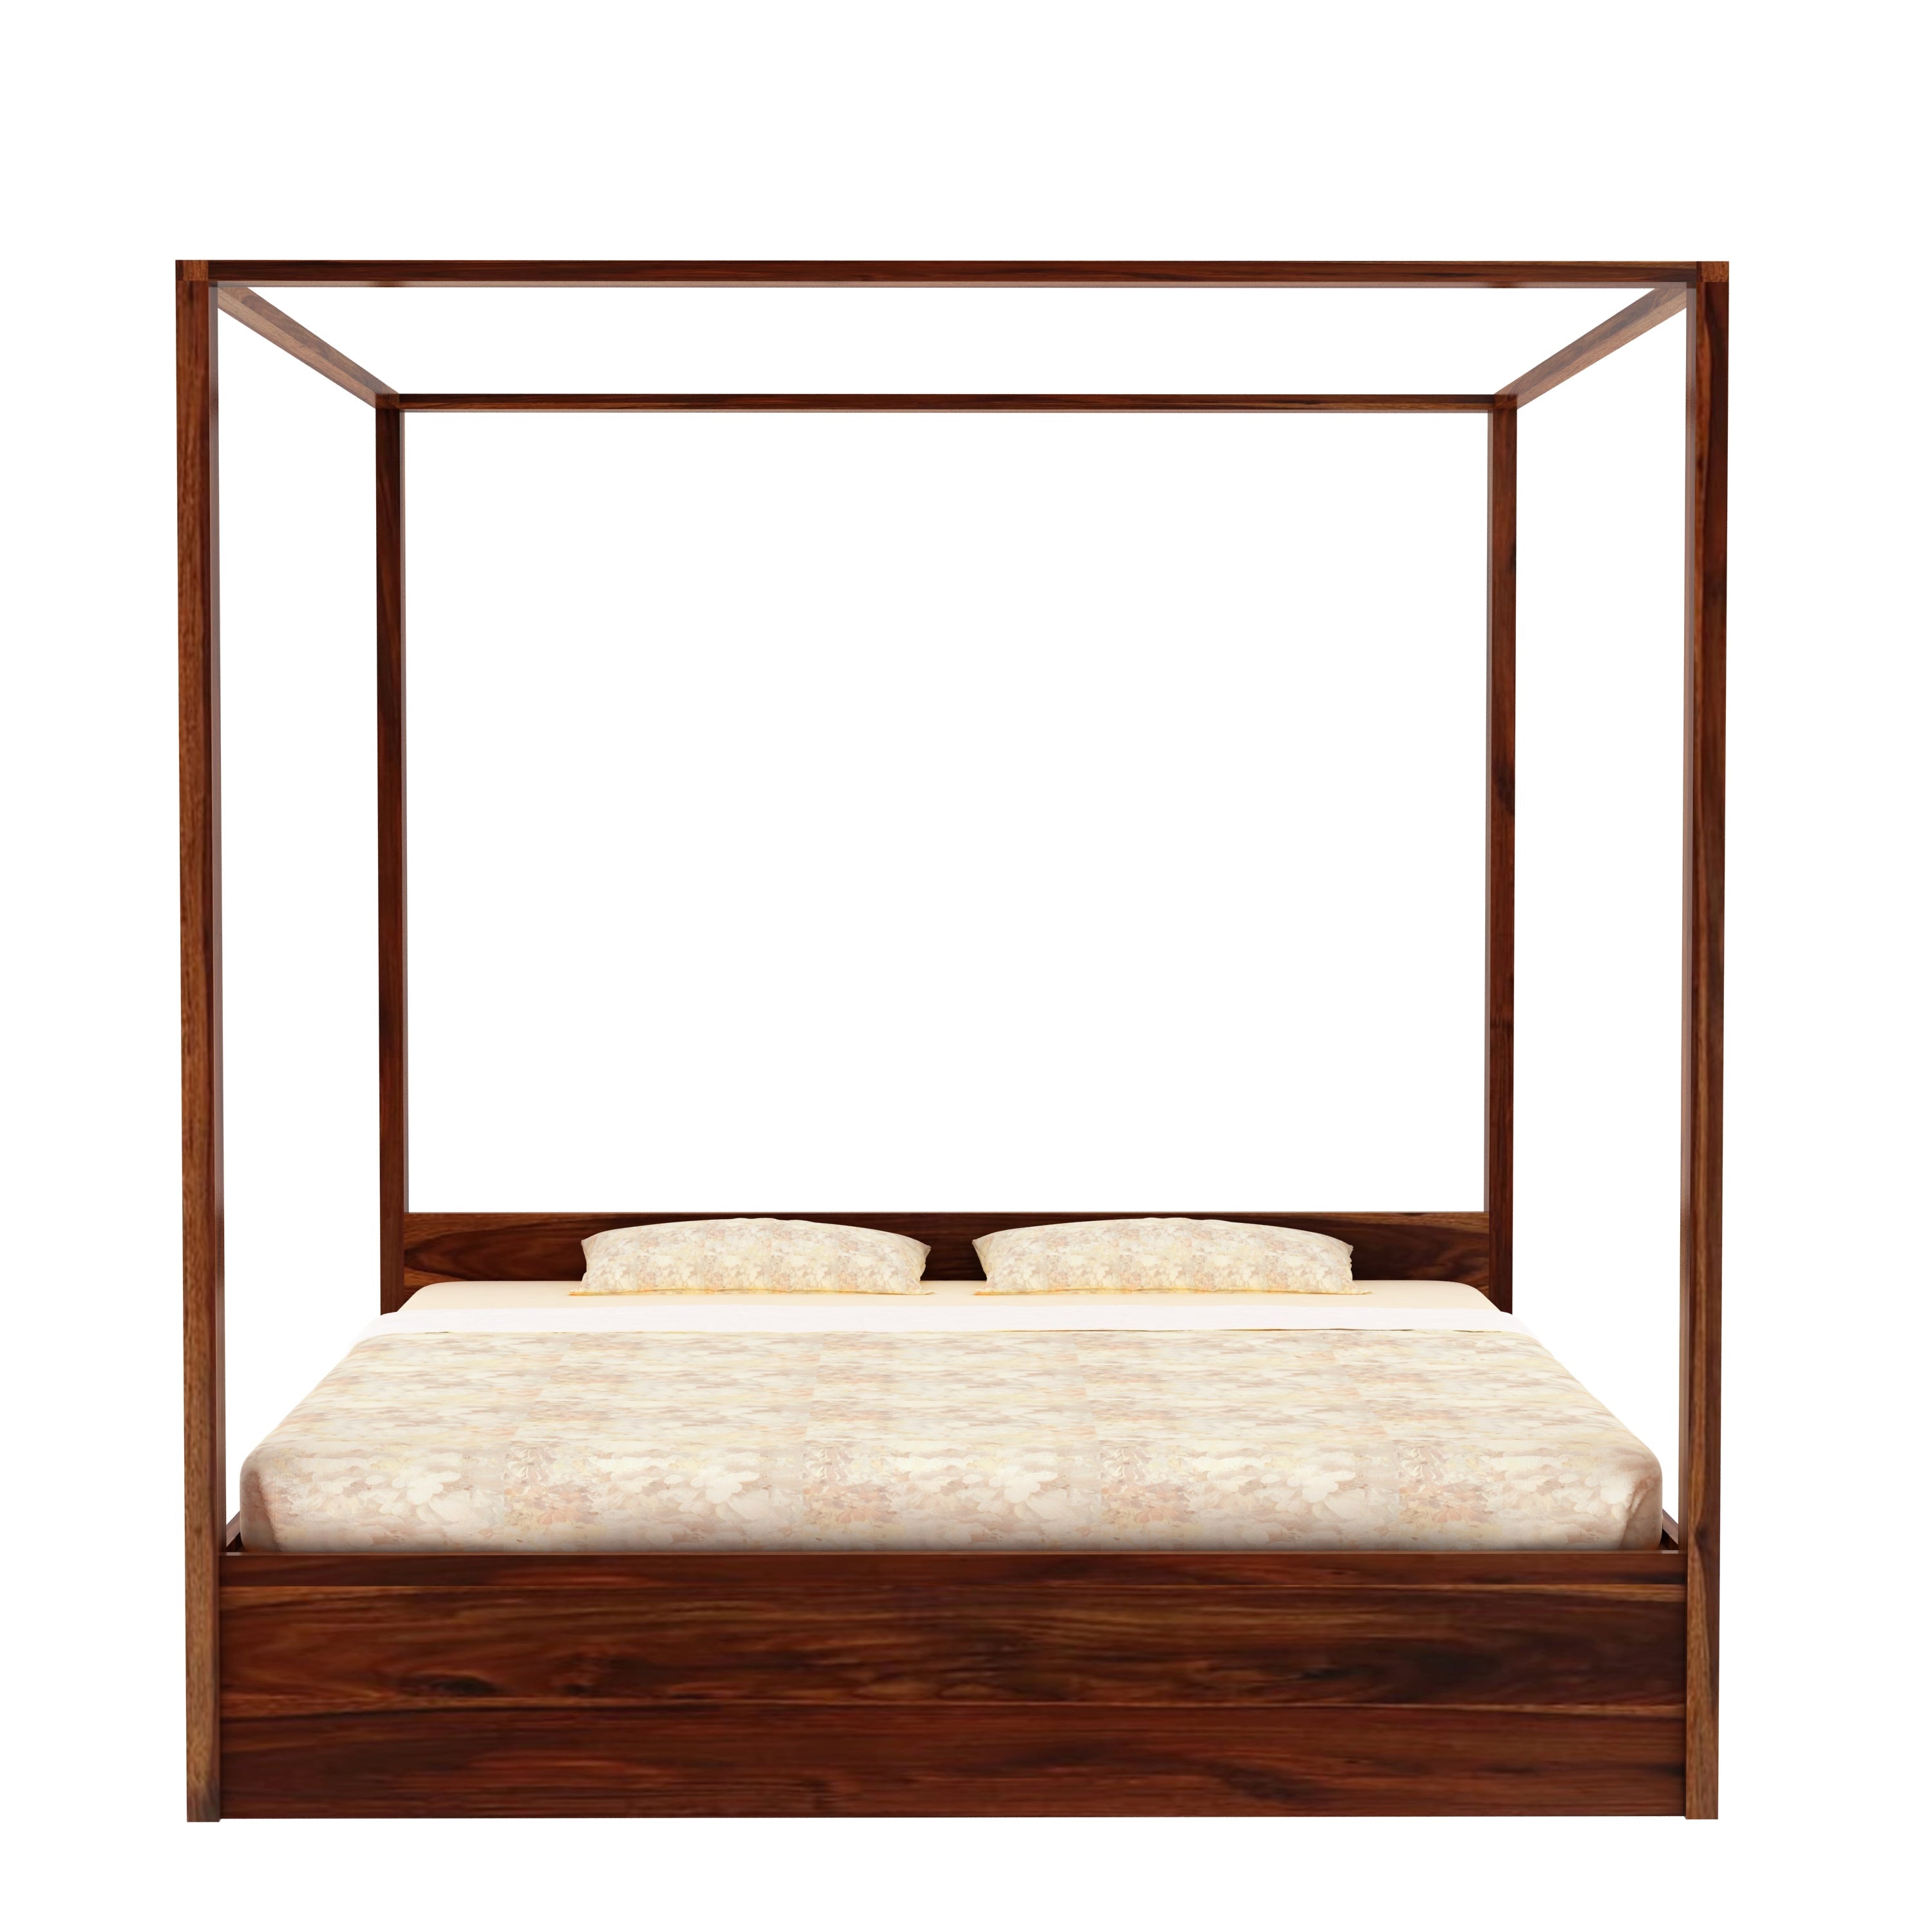 Solivo Solid Sheesham Wood Poster Bed With Four Drawers (Queen Size, Natural Finish)